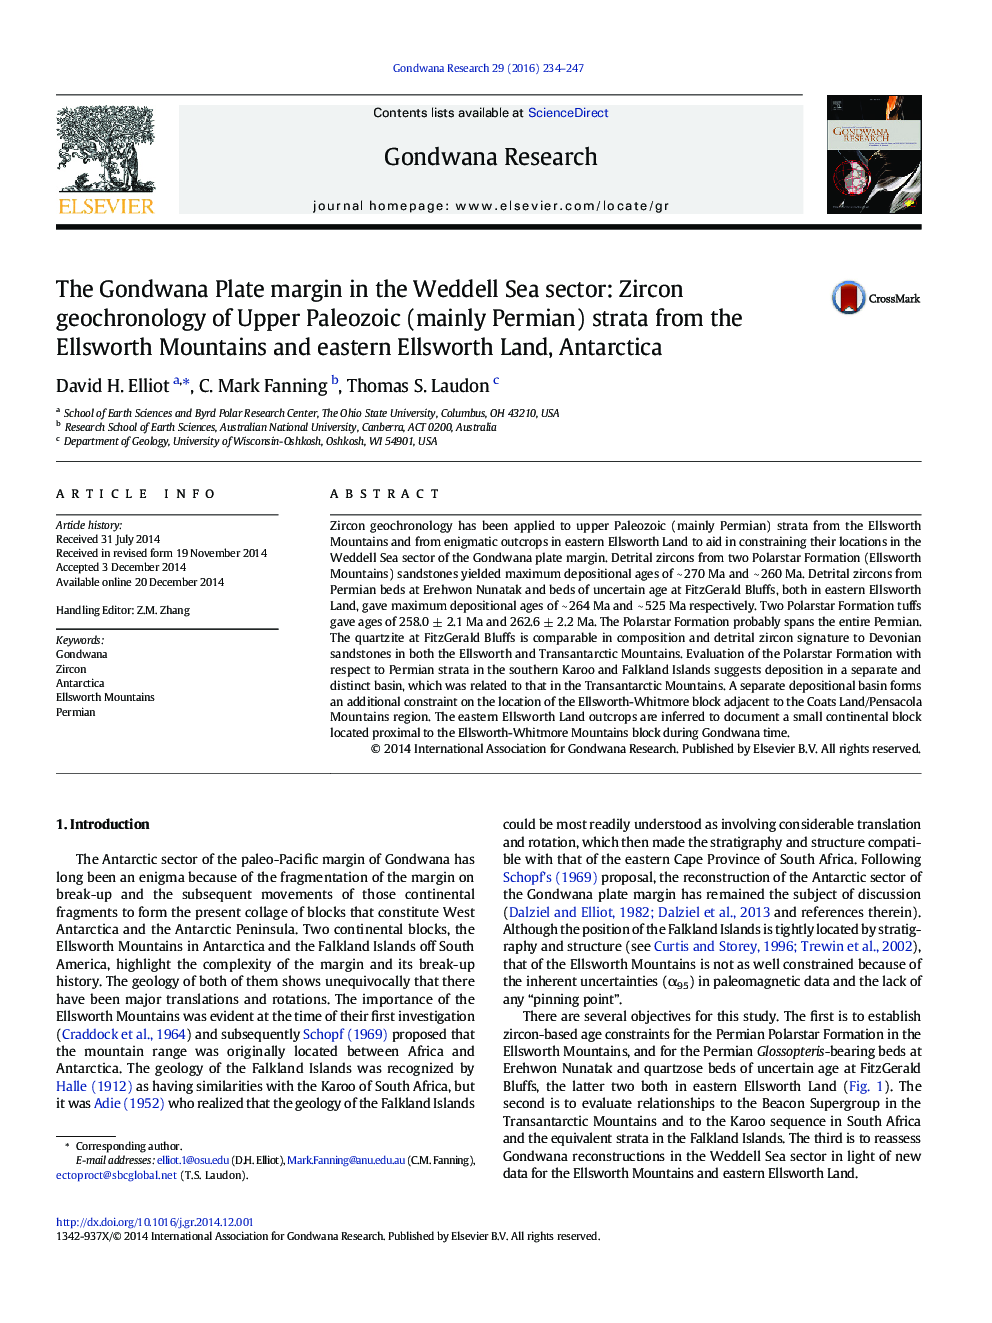 The Gondwana Plate margin in the Weddell Sea sector: Zircon geochronology of Upper Paleozoic (mainly Permian) strata from the Ellsworth Mountains and eastern Ellsworth Land, Antarctica